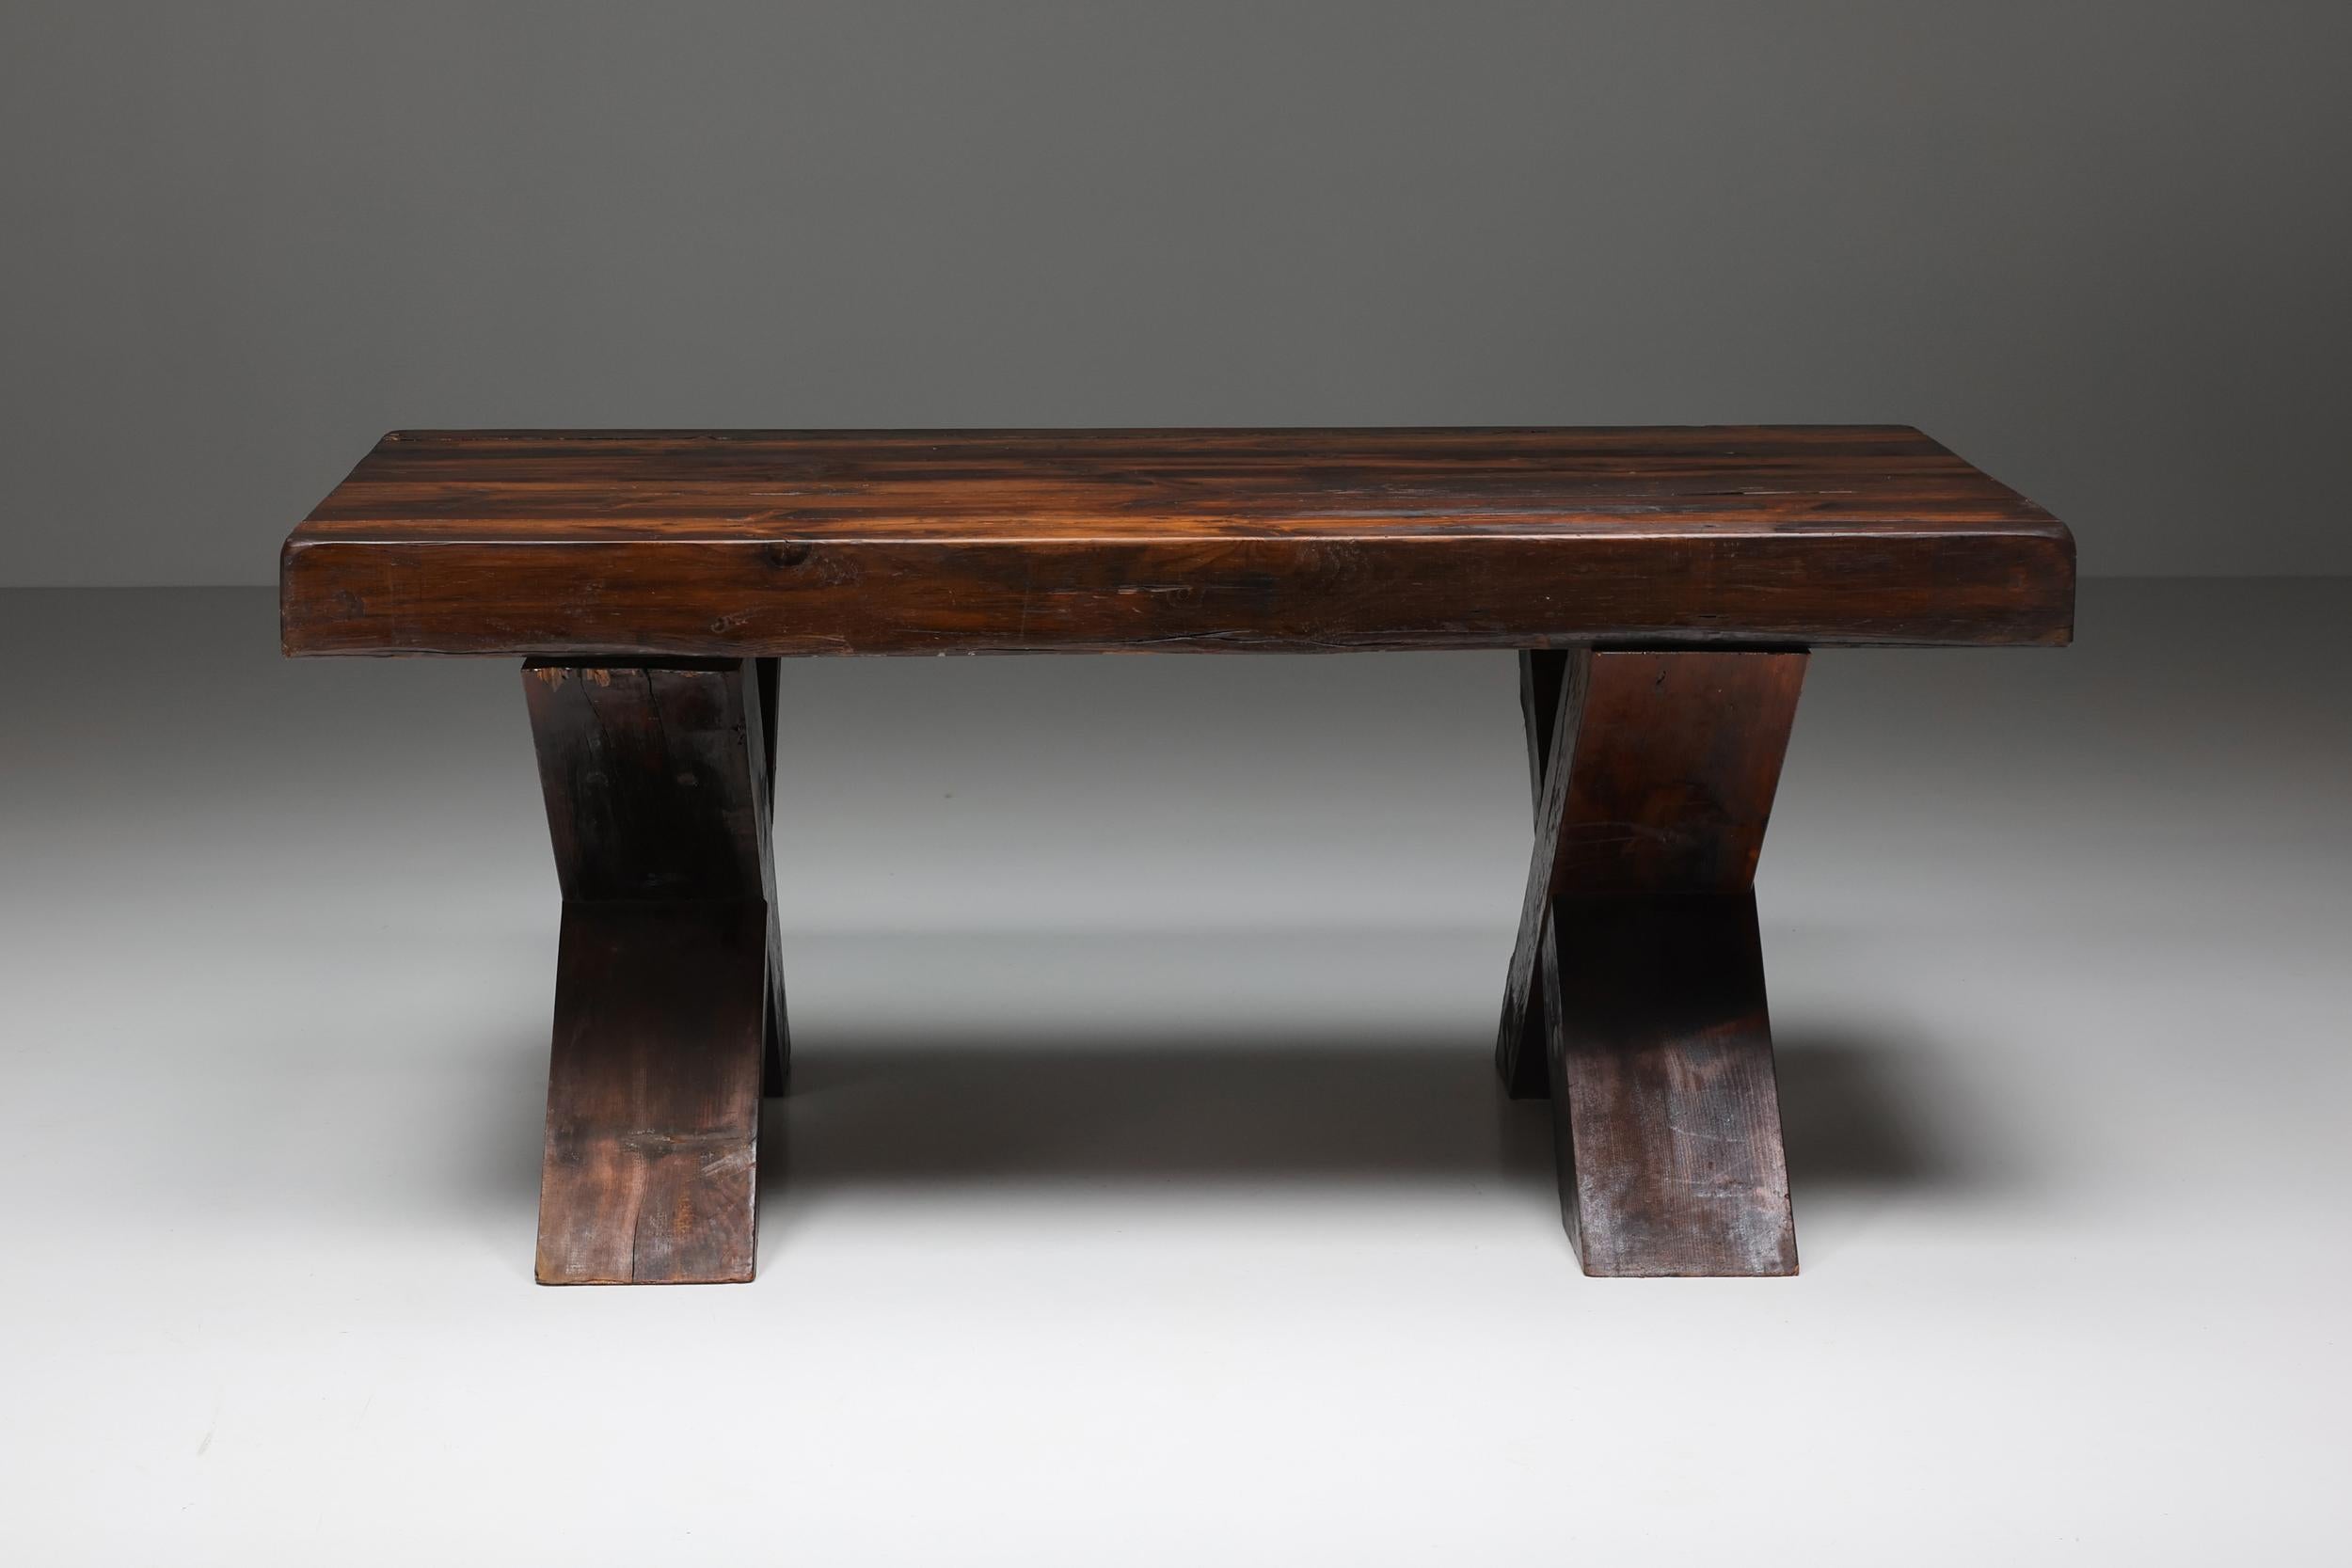 Mid-Century Modern; Italy; Rustic; Brutalist dark wooden dining table with x-legs, Italy, the 1940s; 

Rustic dark wooden dining table with X-shaped legs made in Italy in the 1940s. Seats six people comfortably. The table has a charismatic patina